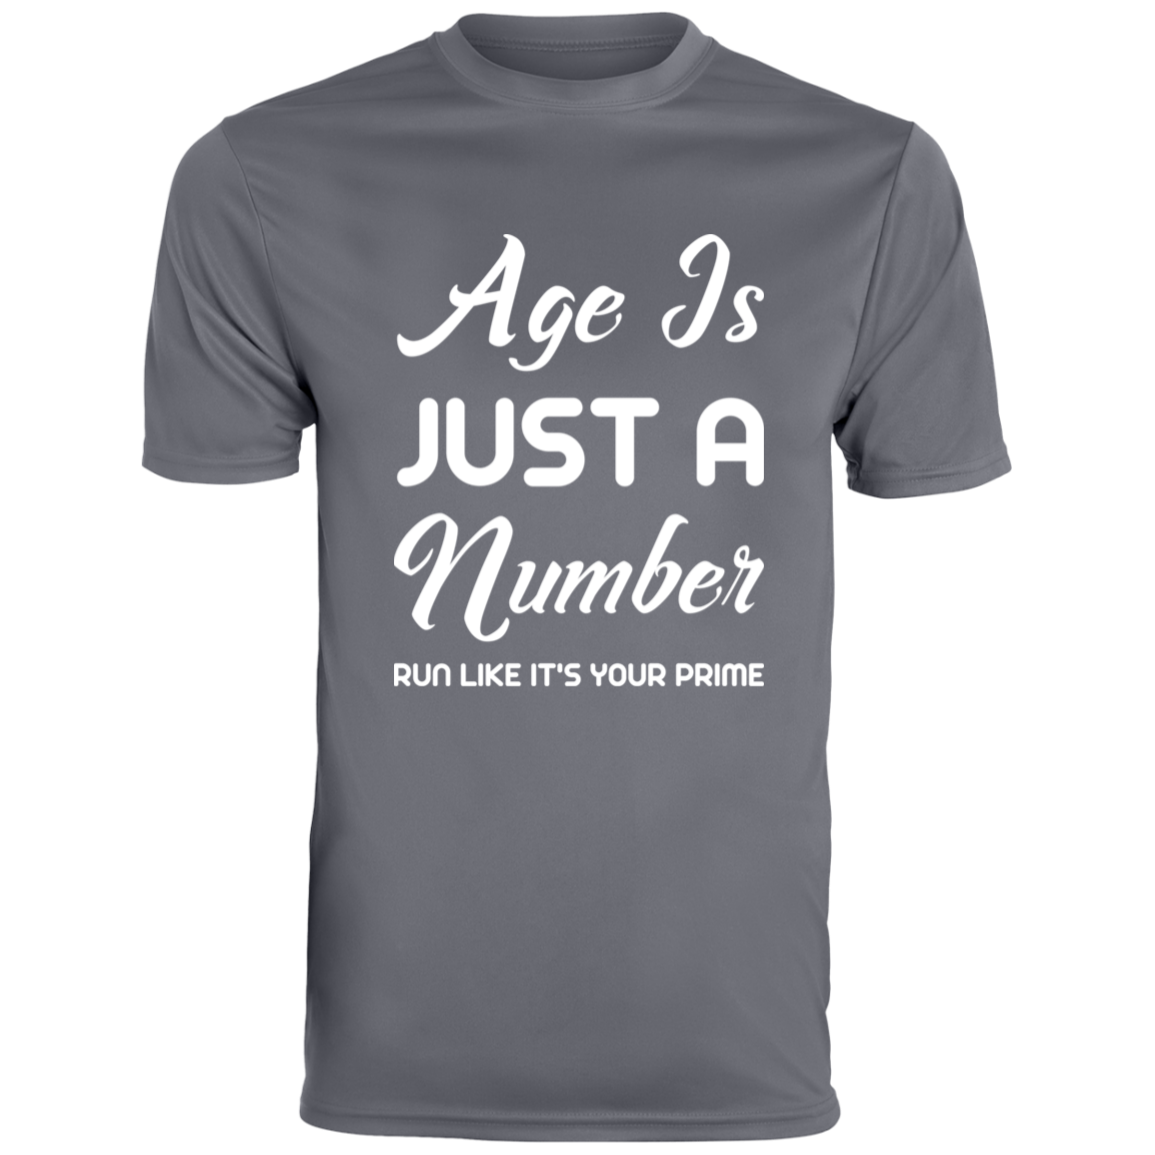 Men's Inspirational Top Age is just a number. Run like it's your prime